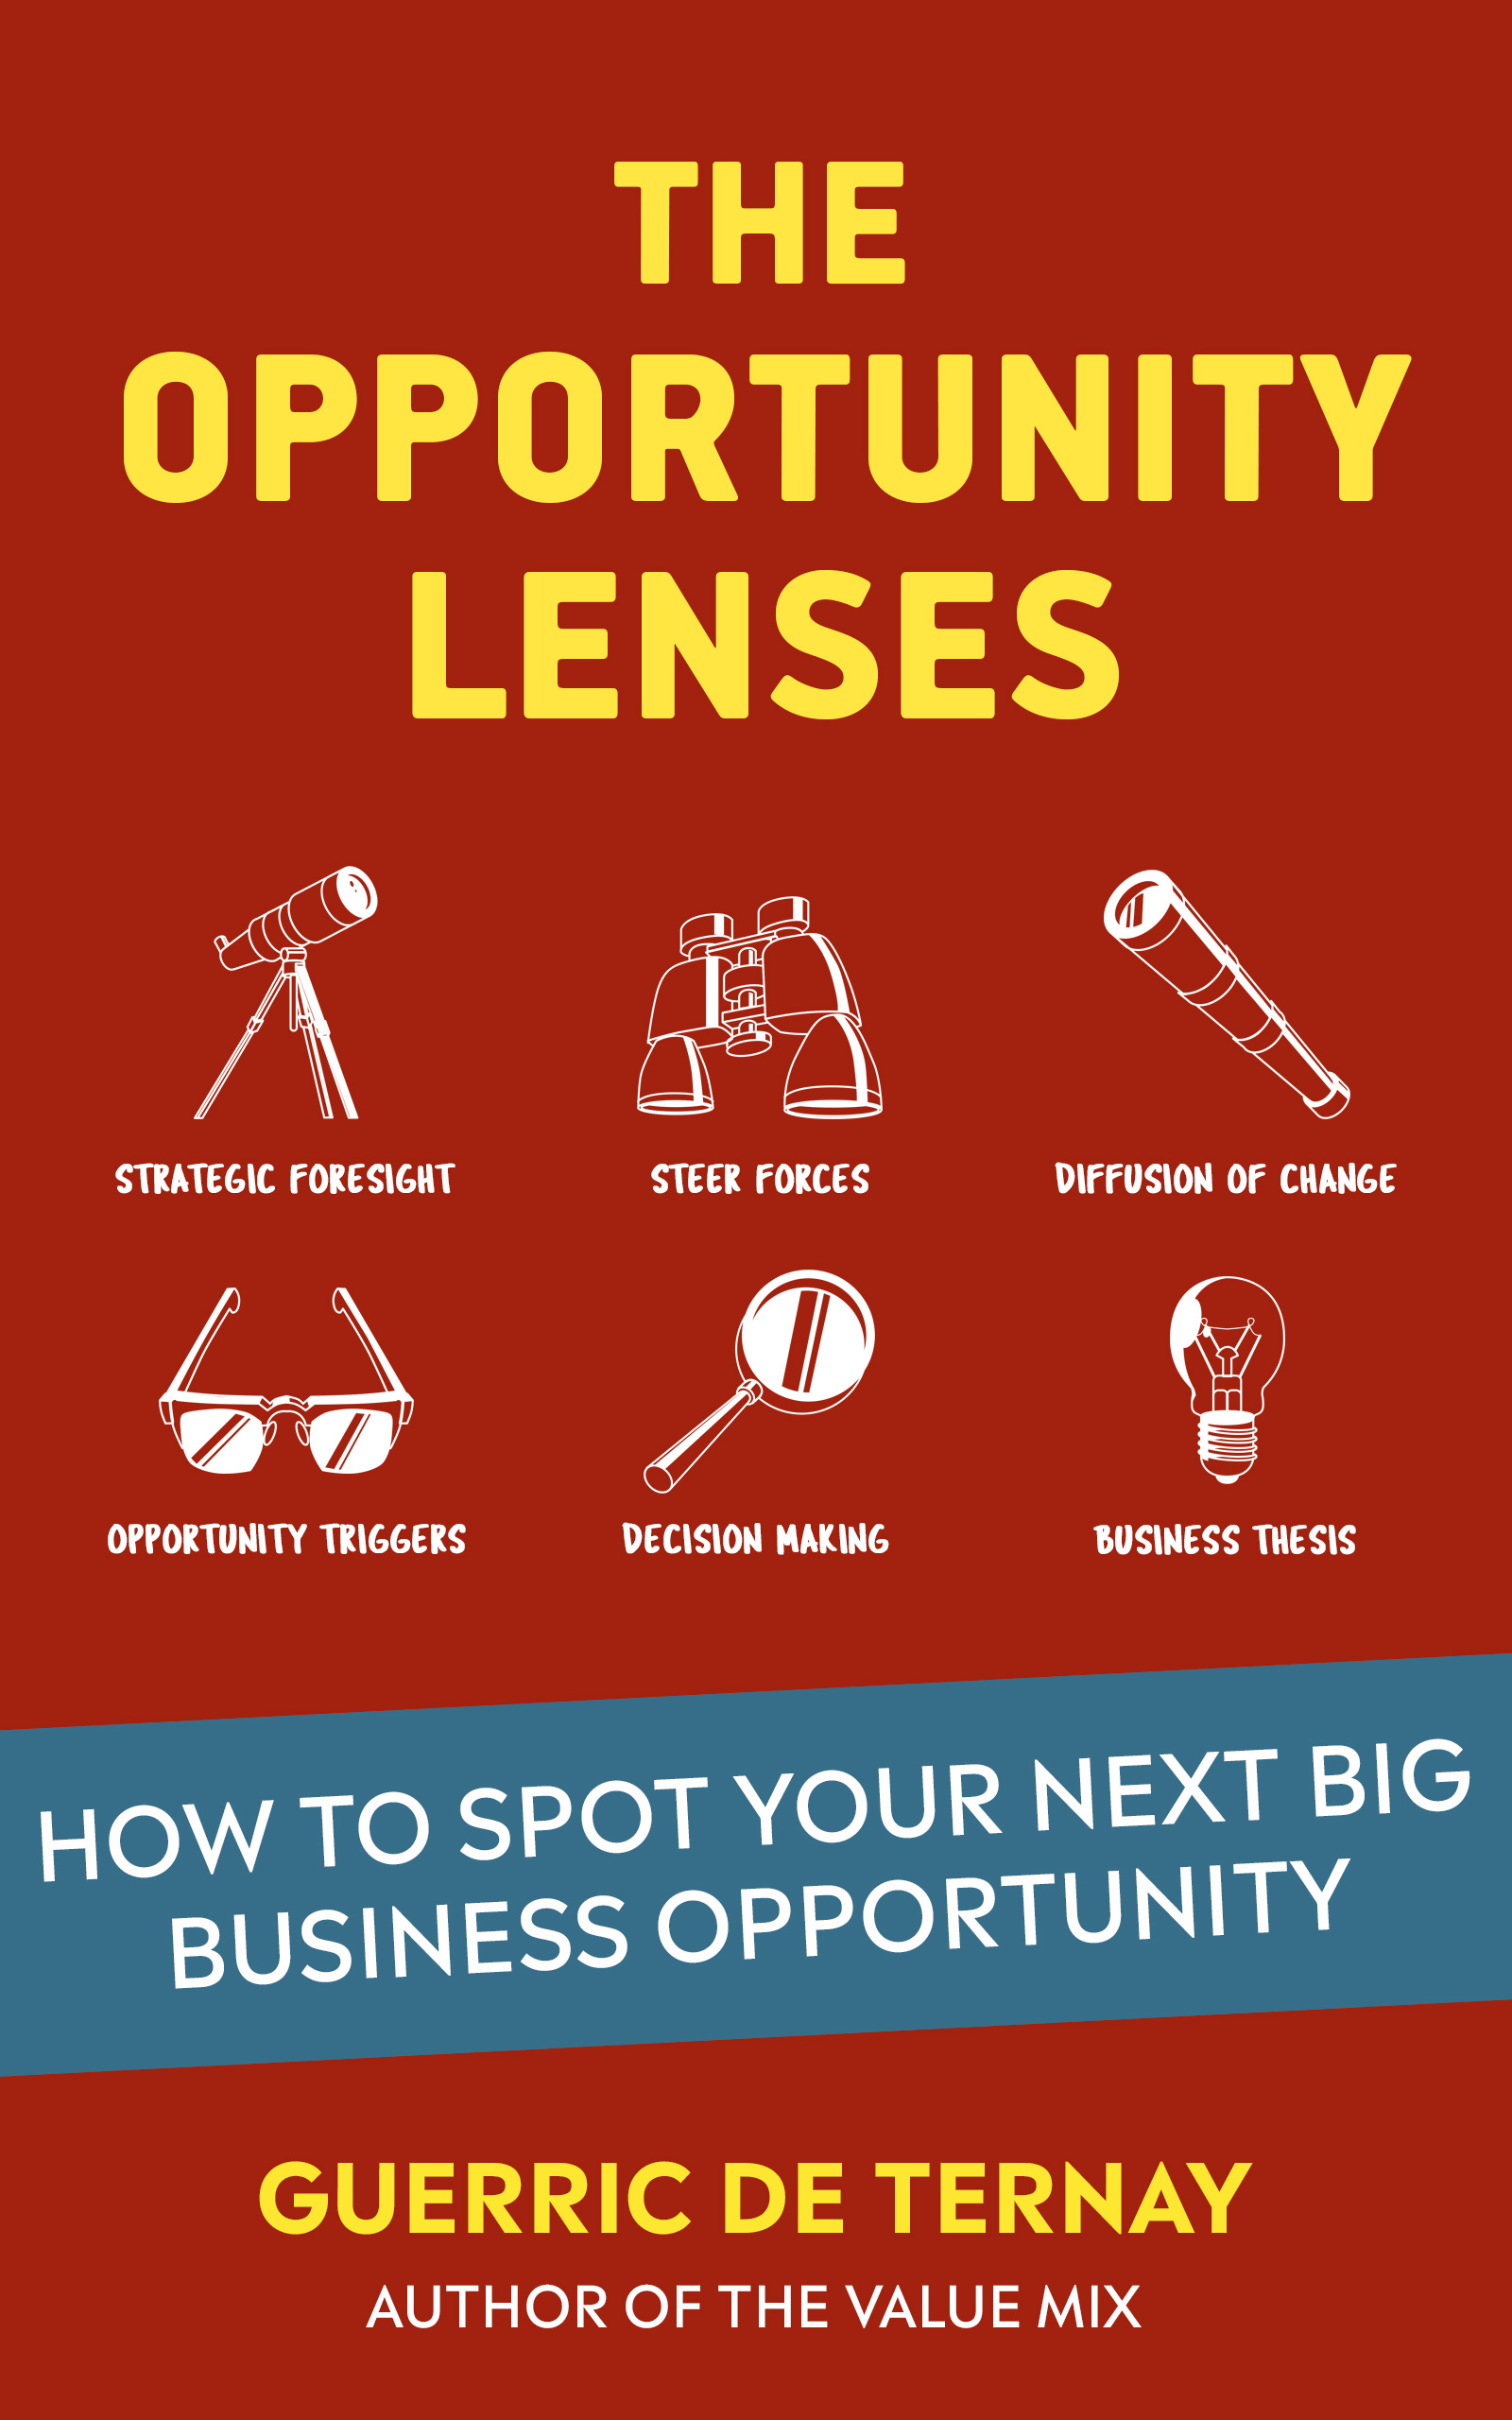 The Opportunity Lenses by Guerric de Ternay - Book Cover